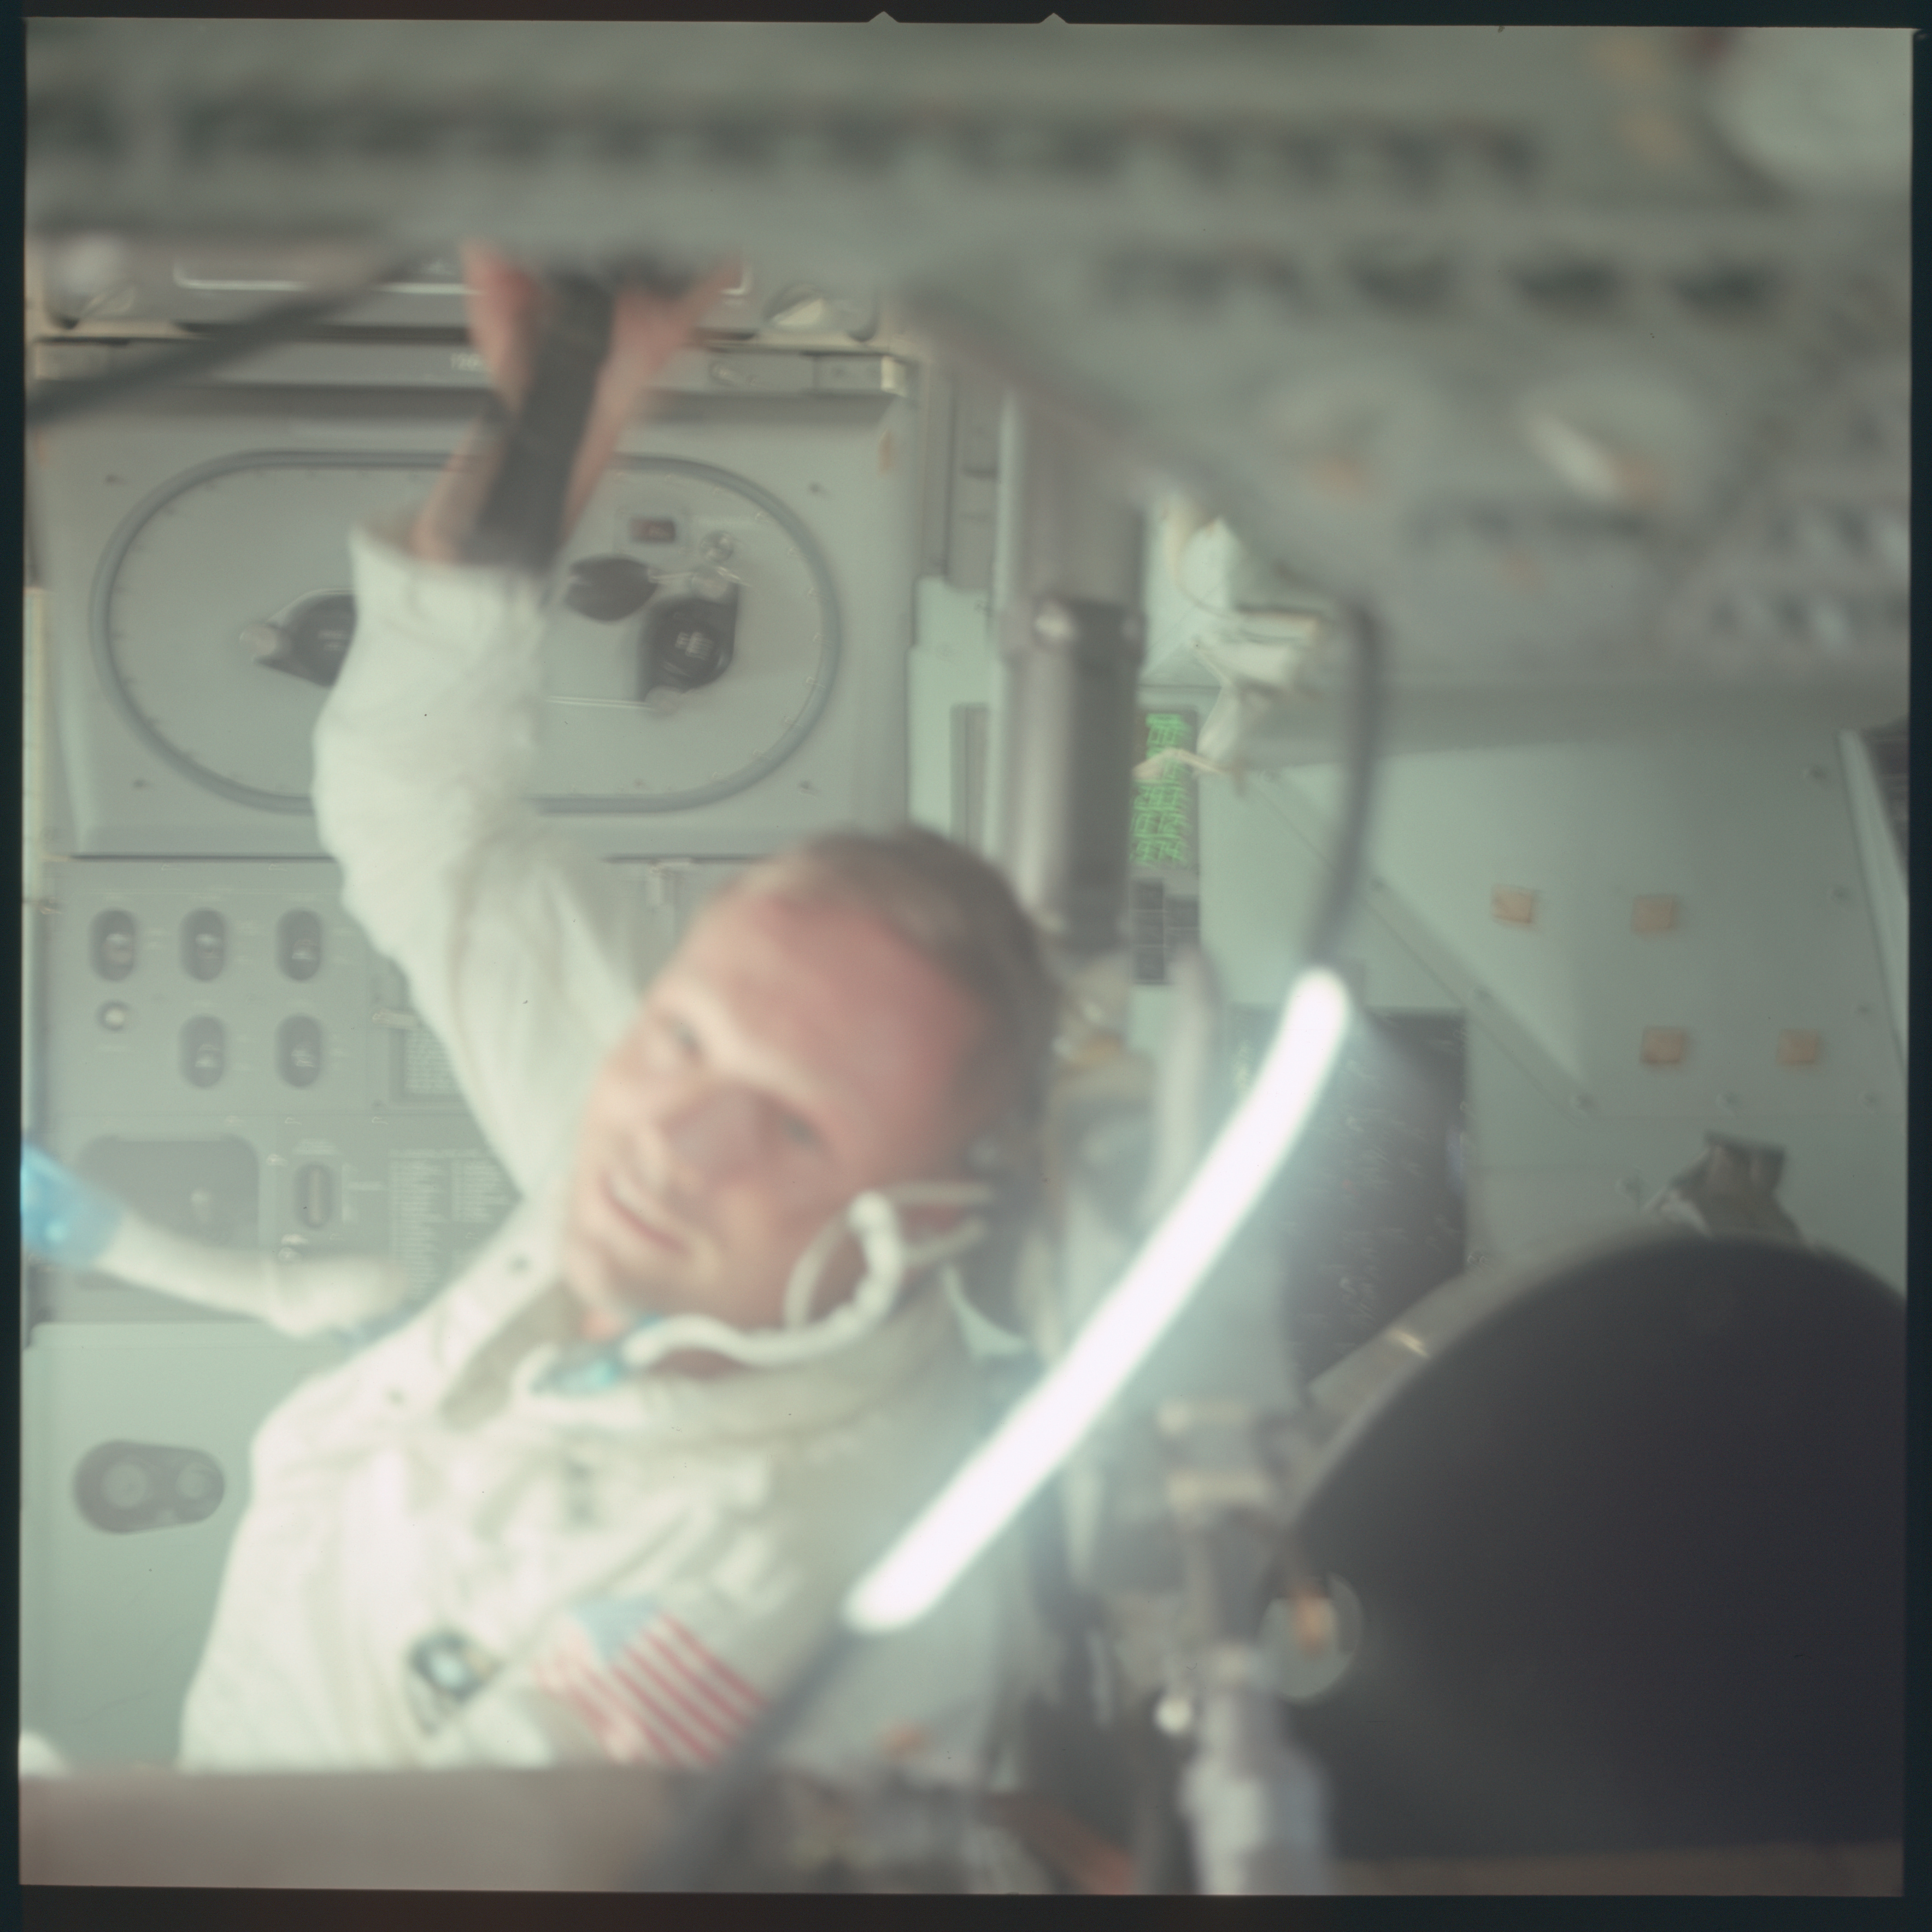 Wikipedia, Apollo 11 NASA photography, Files from Project Apollo Archive Flickr Stream, Flickr image